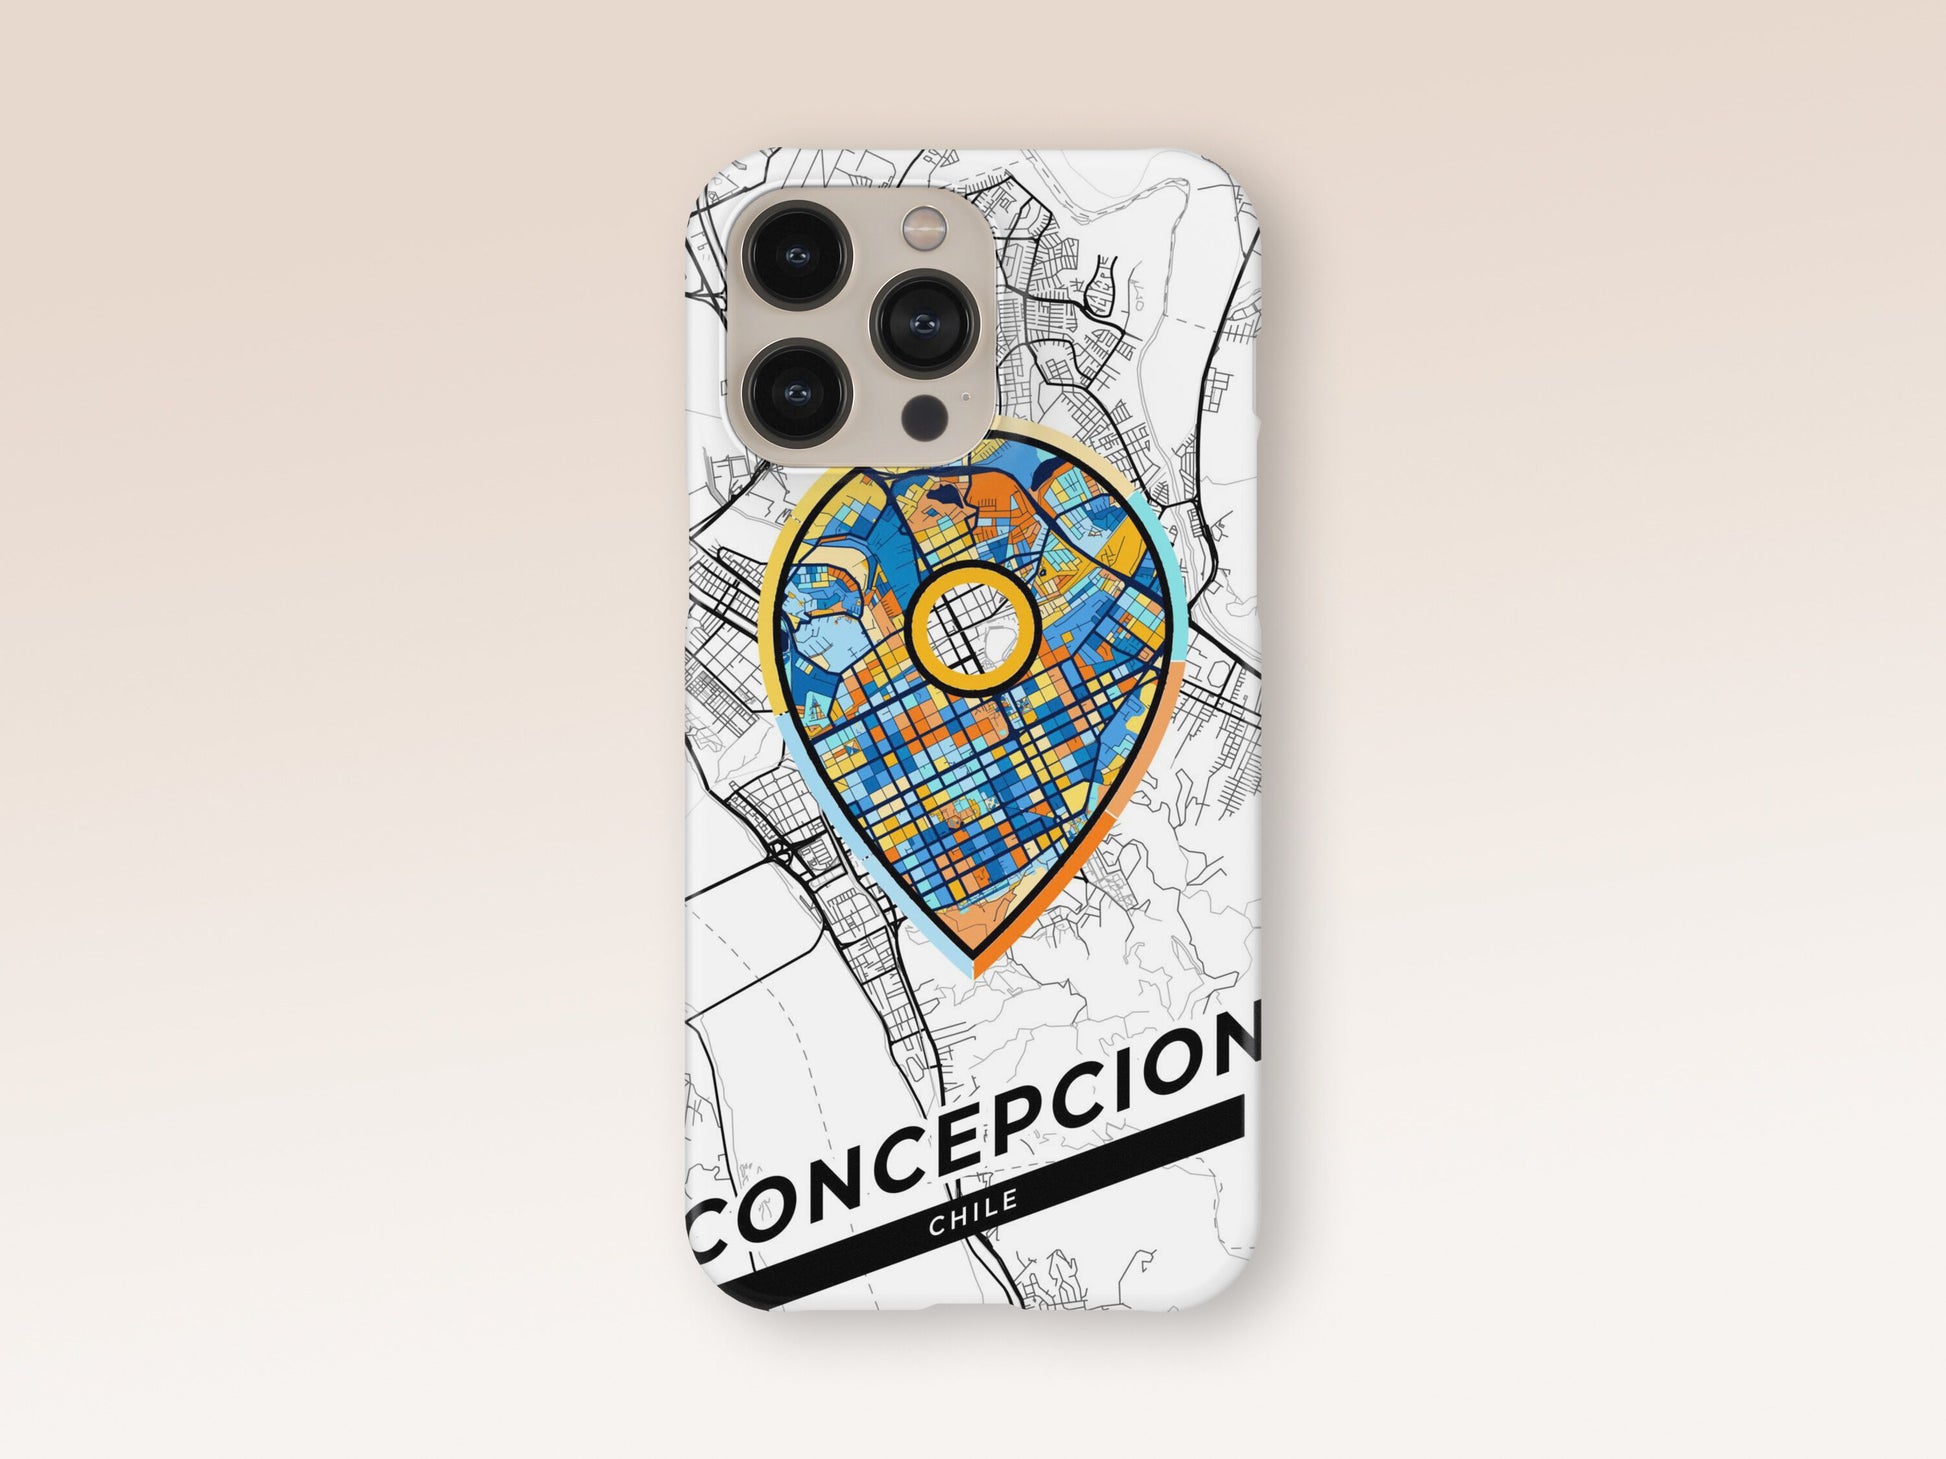 Concepcion Chile slim phone case with colorful icon. Birthday, wedding or housewarming gift. Couple match cases. 1